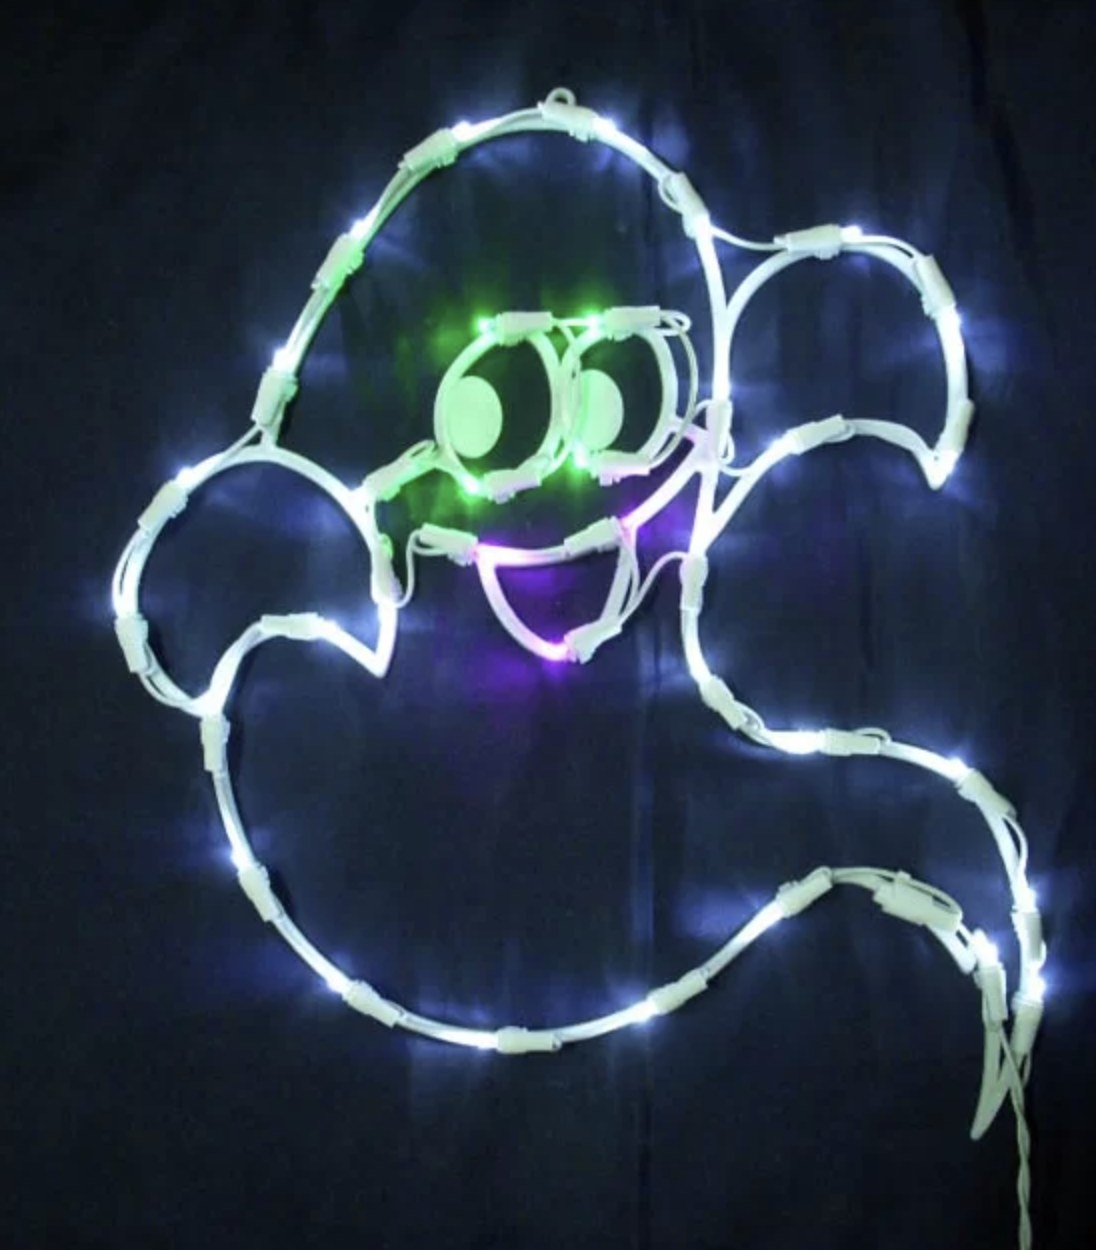 The ghost character shaped  has green eyes, a purple mouth and white body